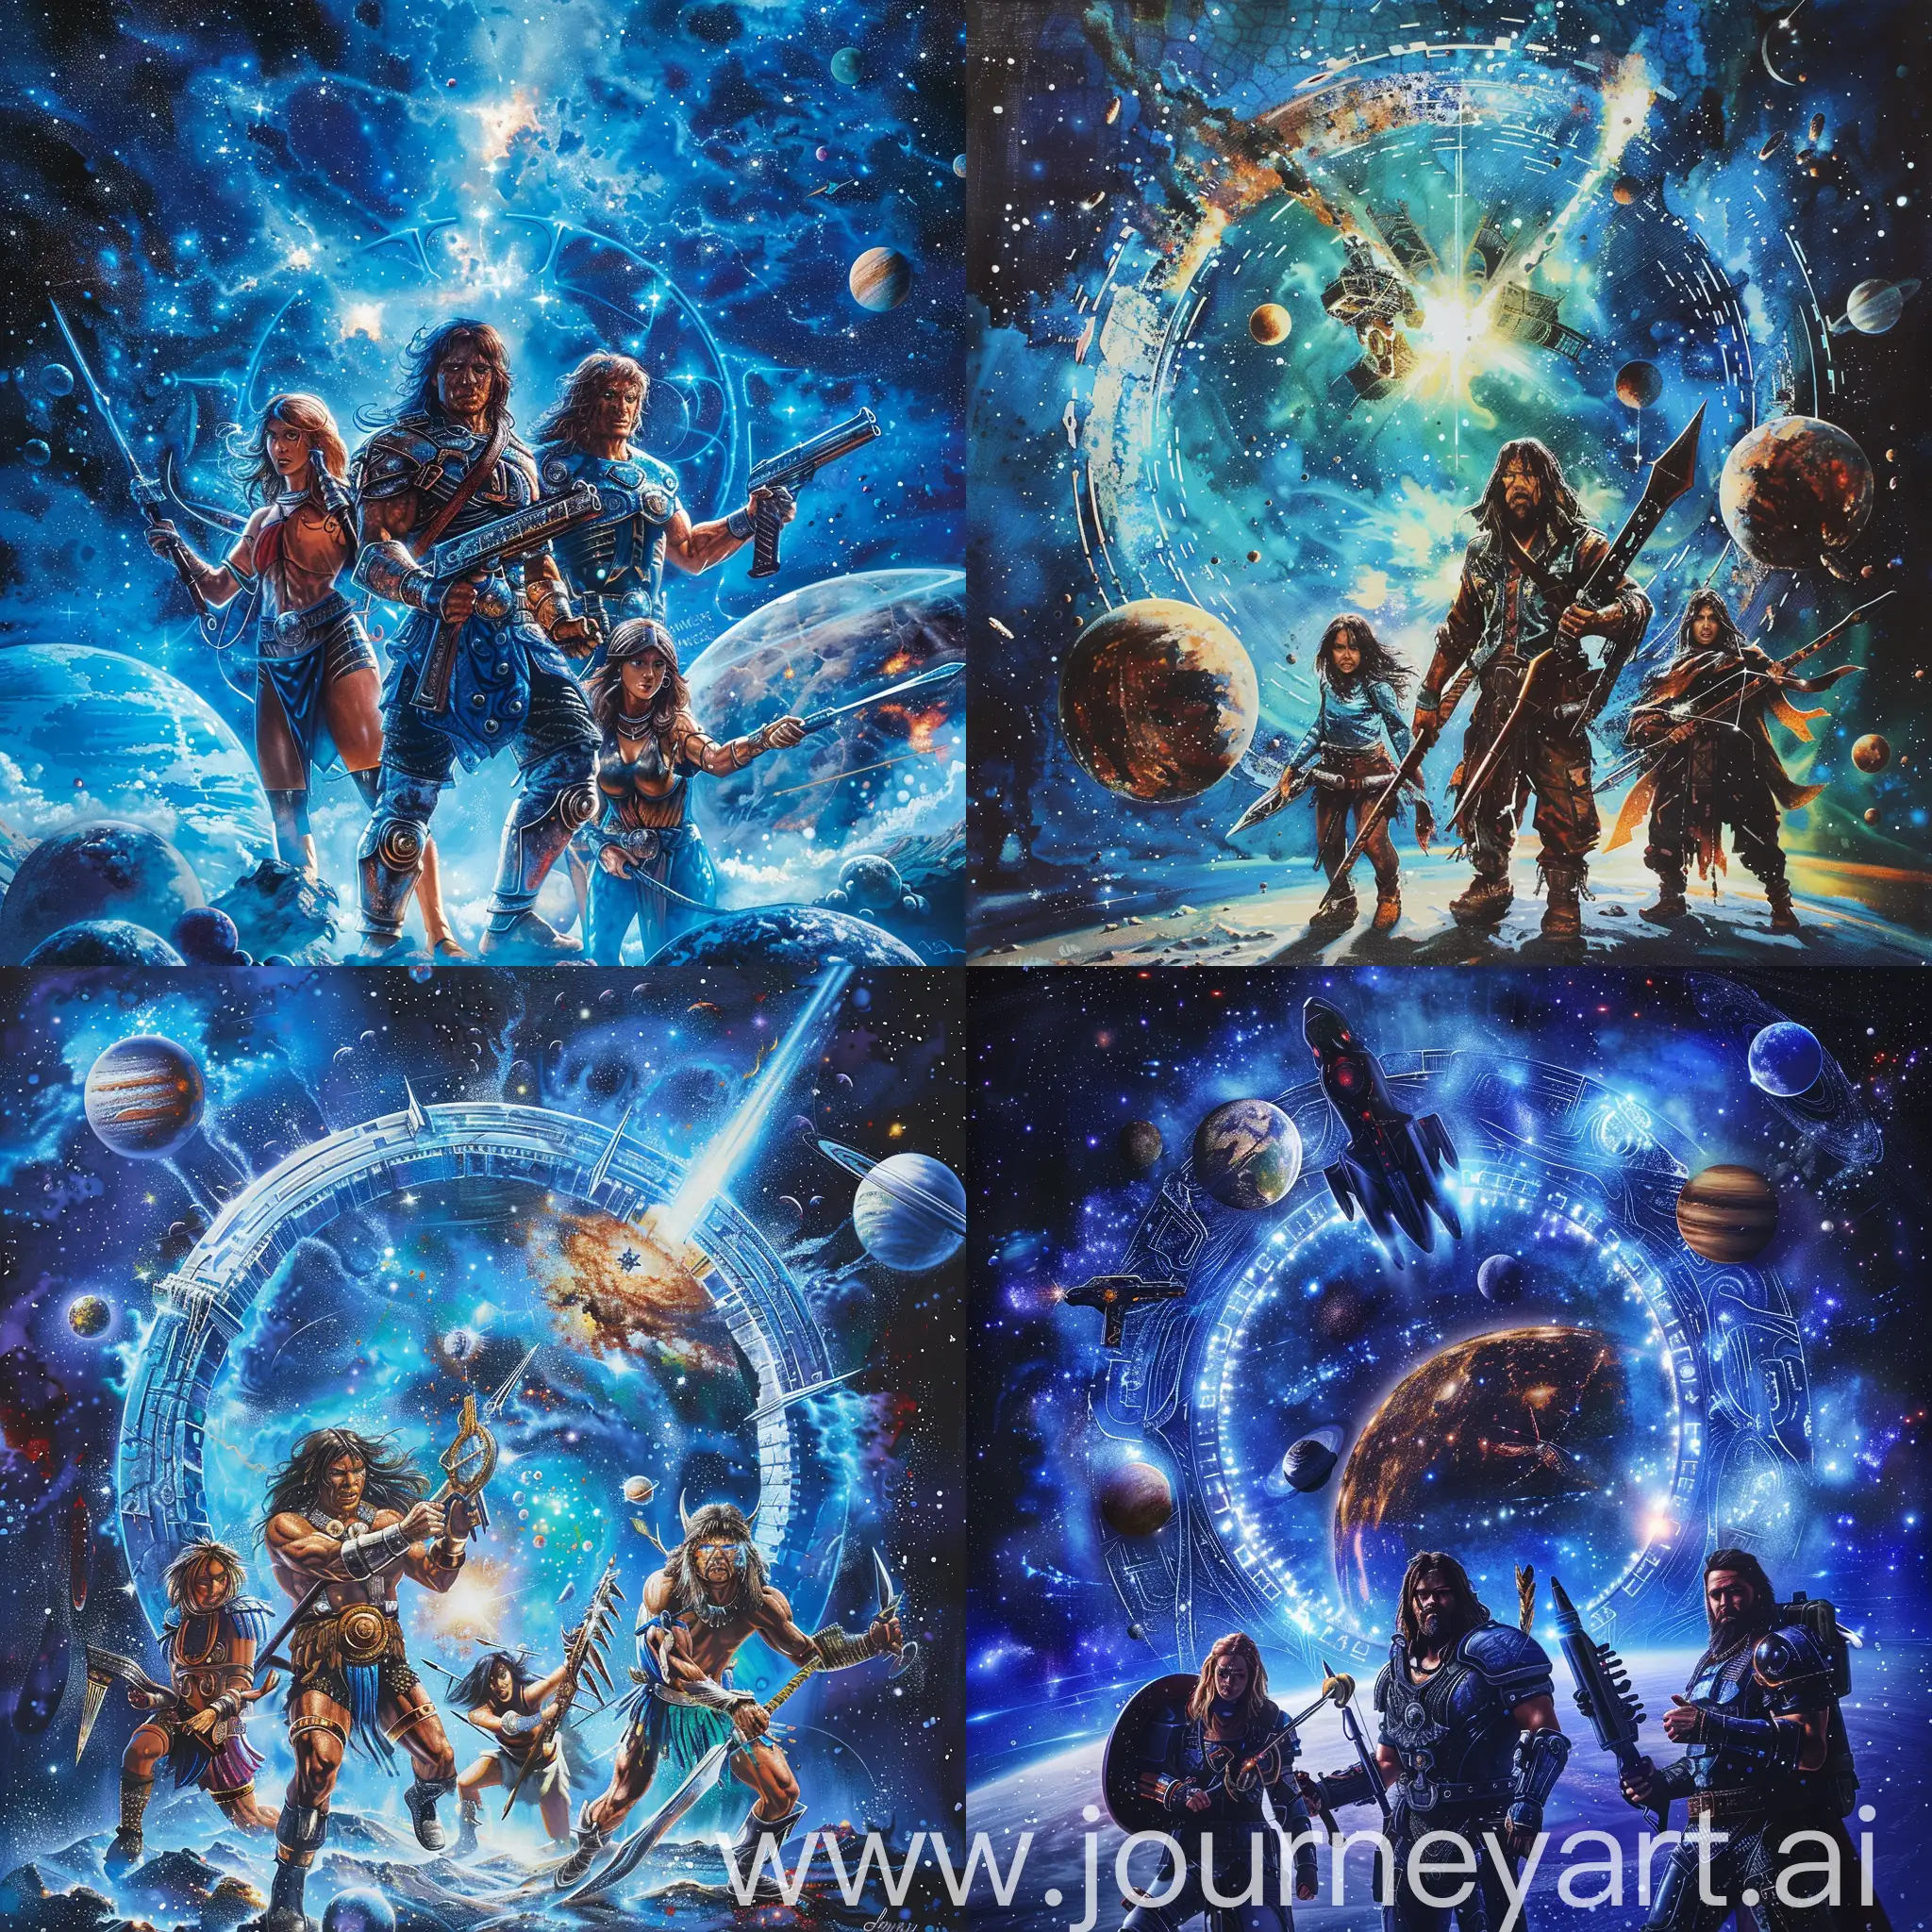 Interstellar-Warriors-Guarding-Stargate-and-Planets-in-a-Galaxy-of-Blue-Shades